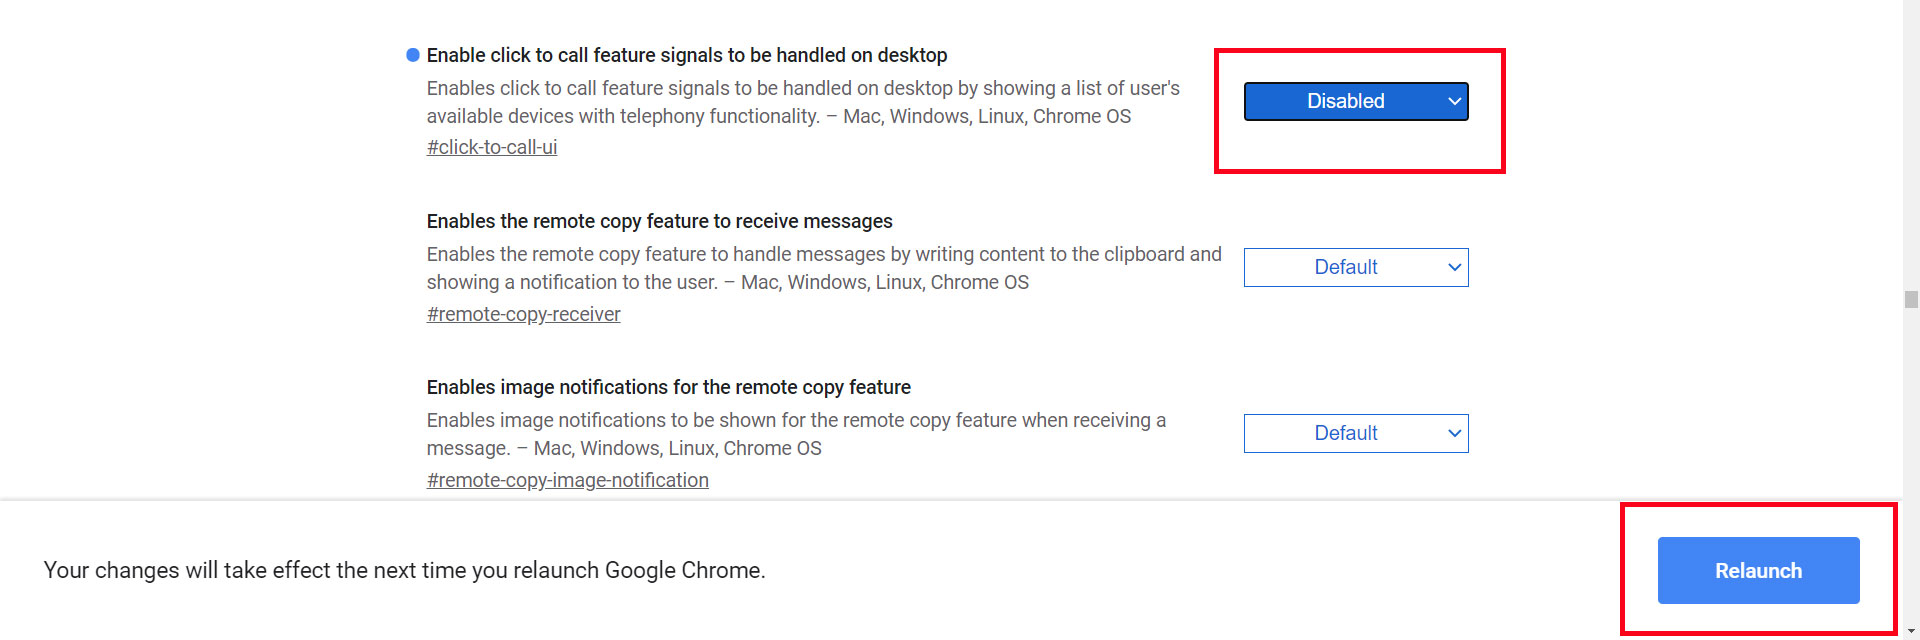 Click-to-Call Installation: Relaunch Chrome button highlighted after enabling click-to-call on a desktop